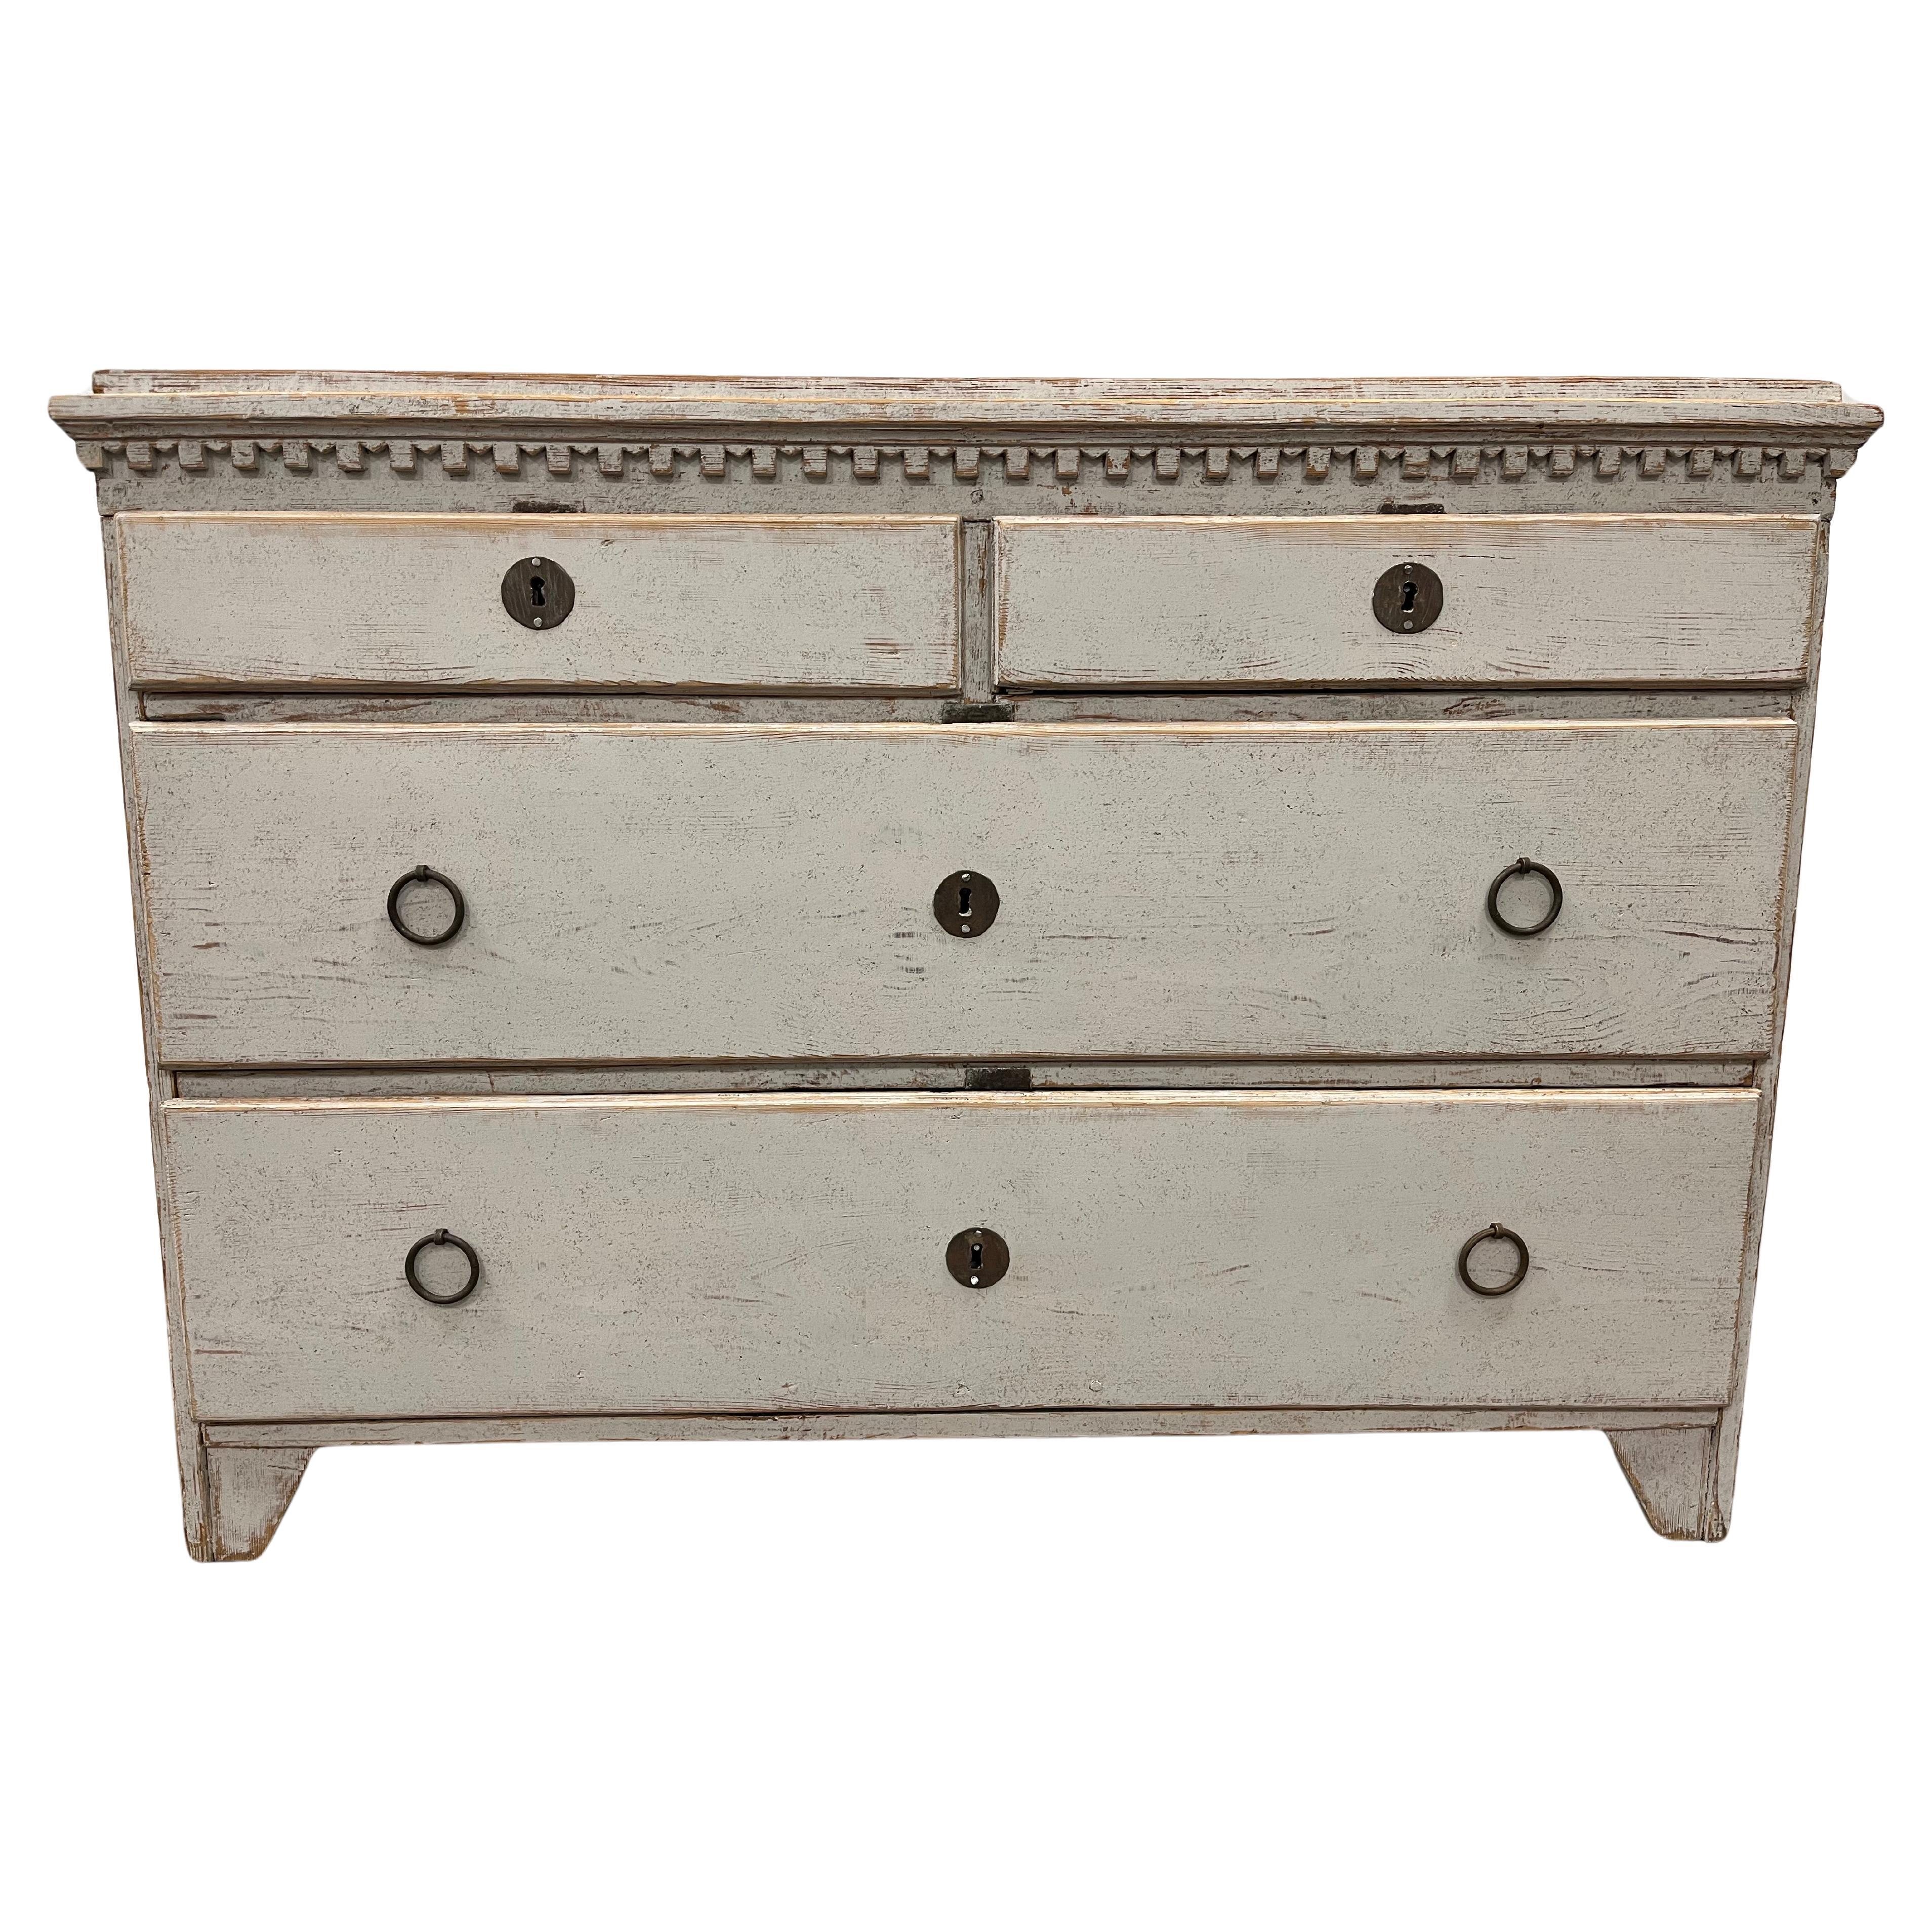 19th Century Swedish Late Gustavian Chest of Drawers For Sale